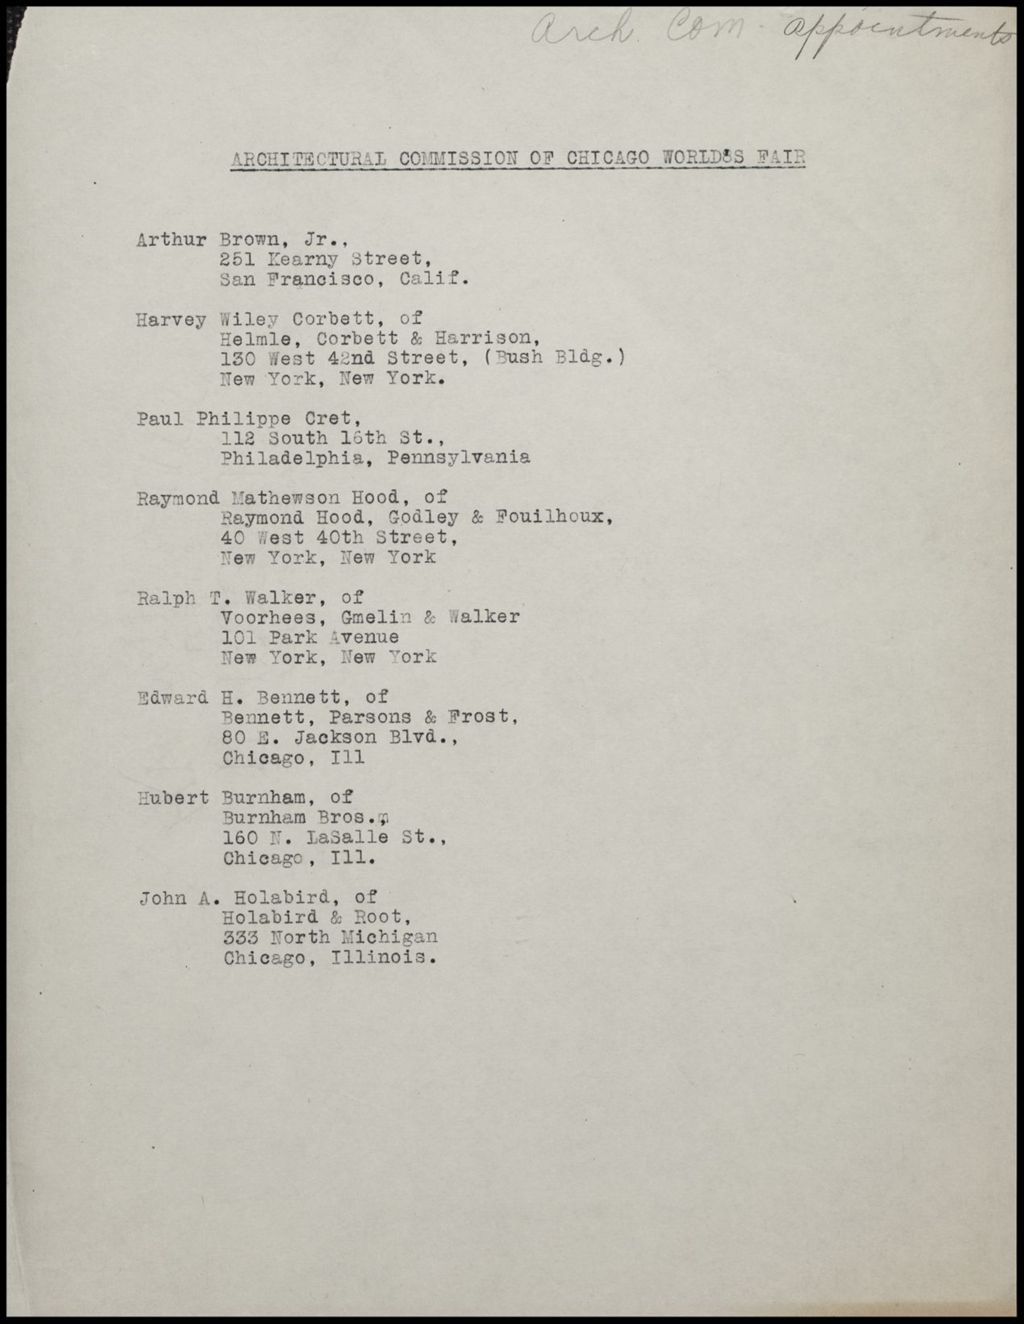 Architectural Committee -appointments, ca. 1933 - 1934 (Folder 5-9)